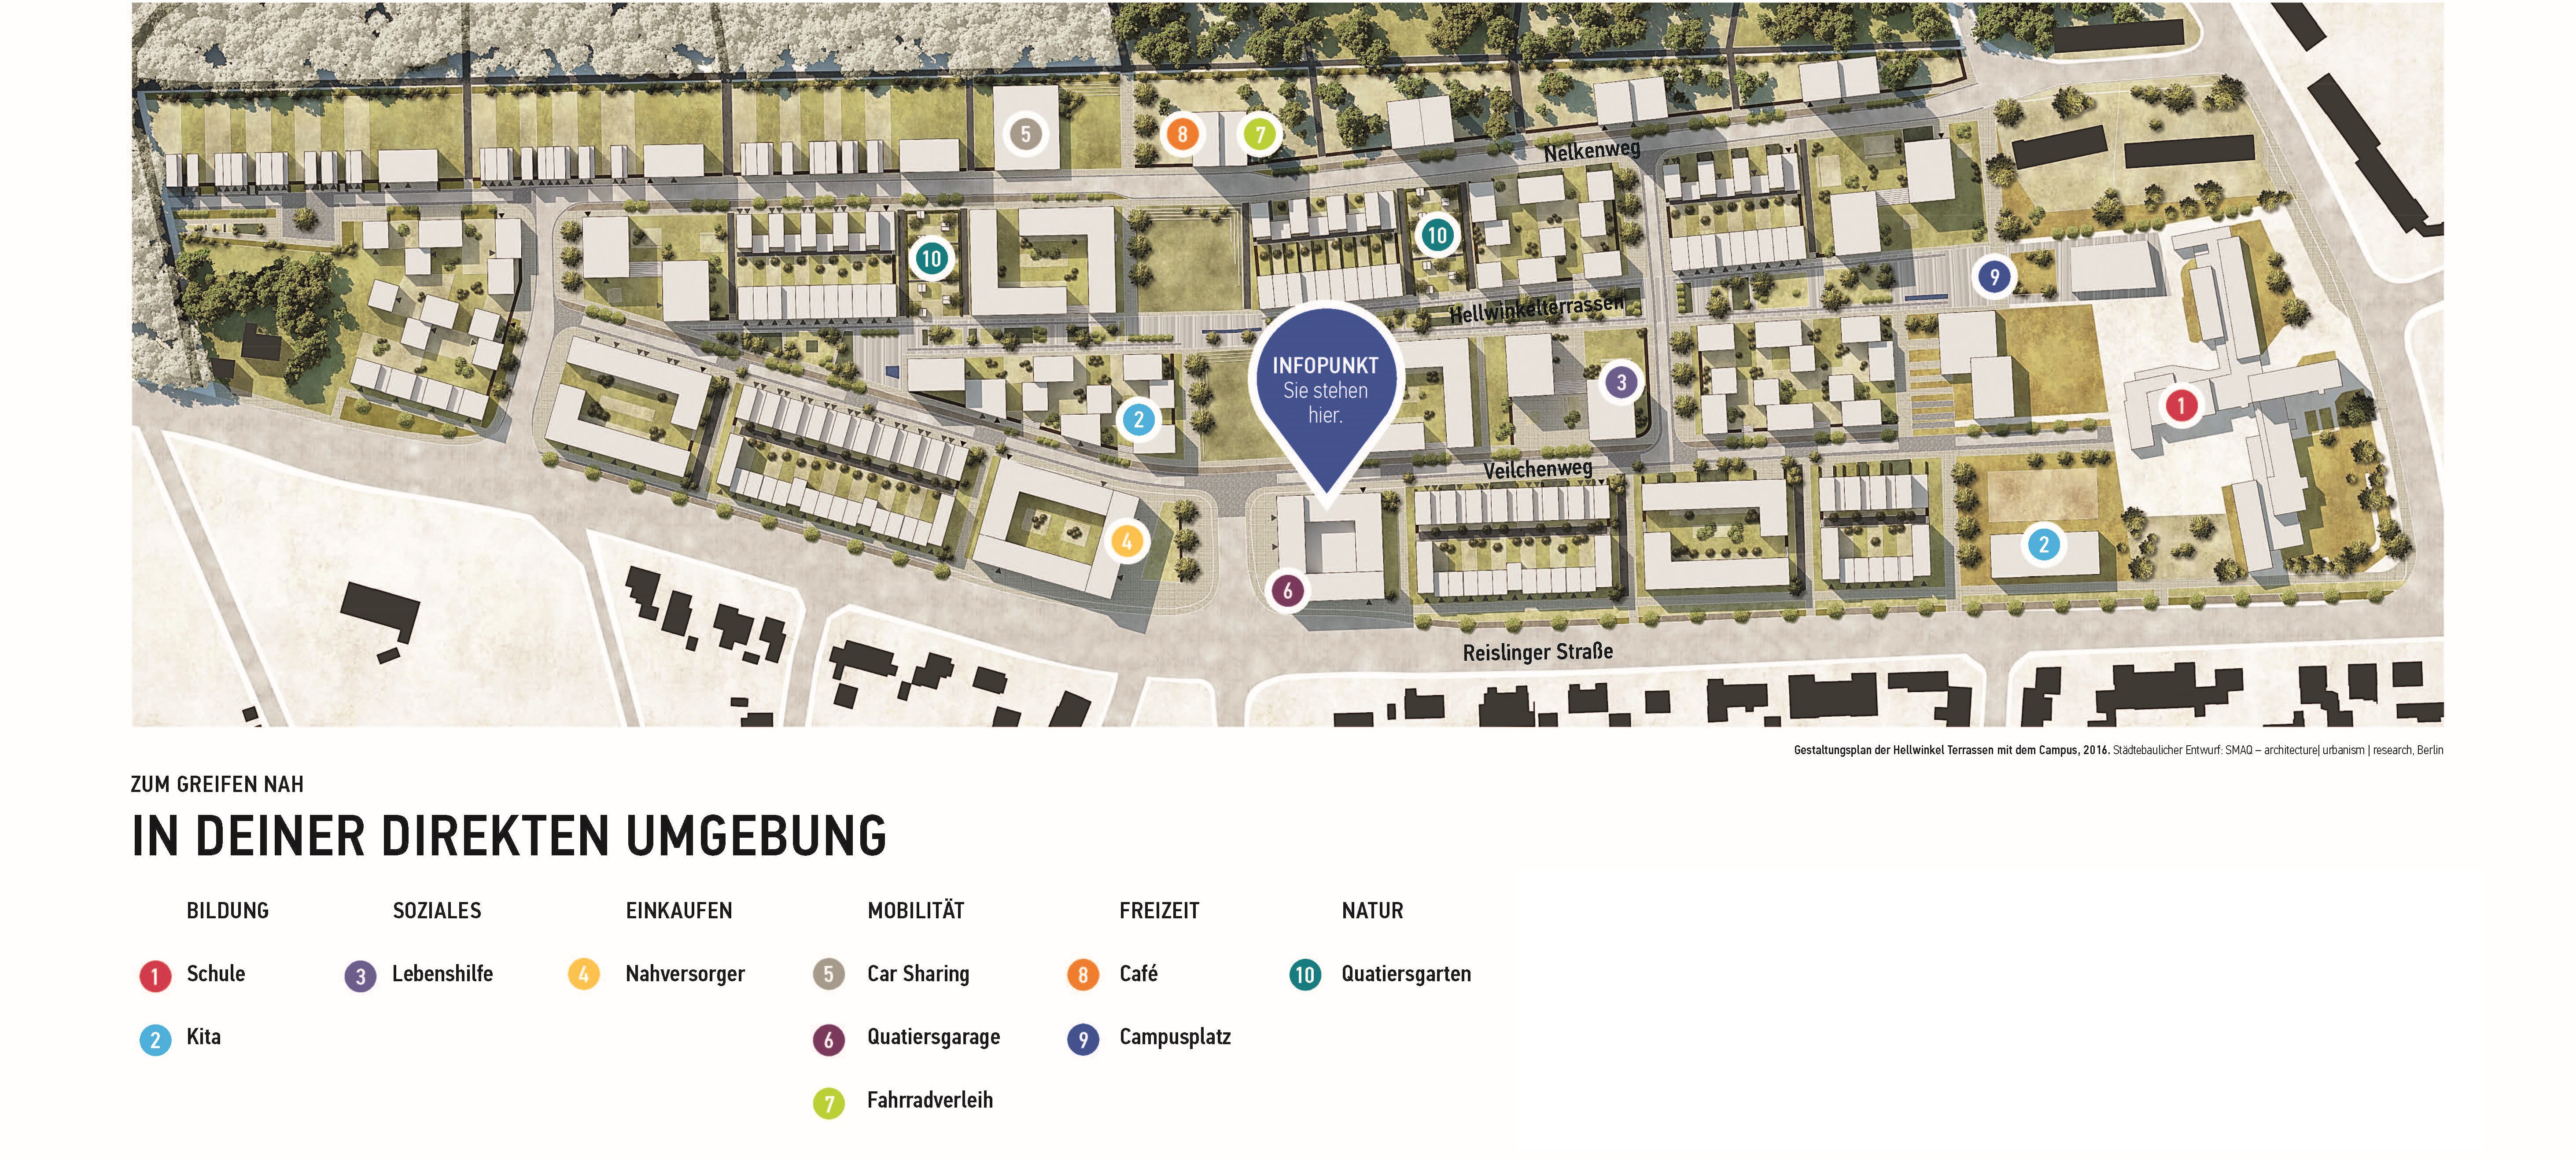 Overview map of Hellwinkel Terrassen with location of educational, social, shopping, mobility, leisure and nature facilities